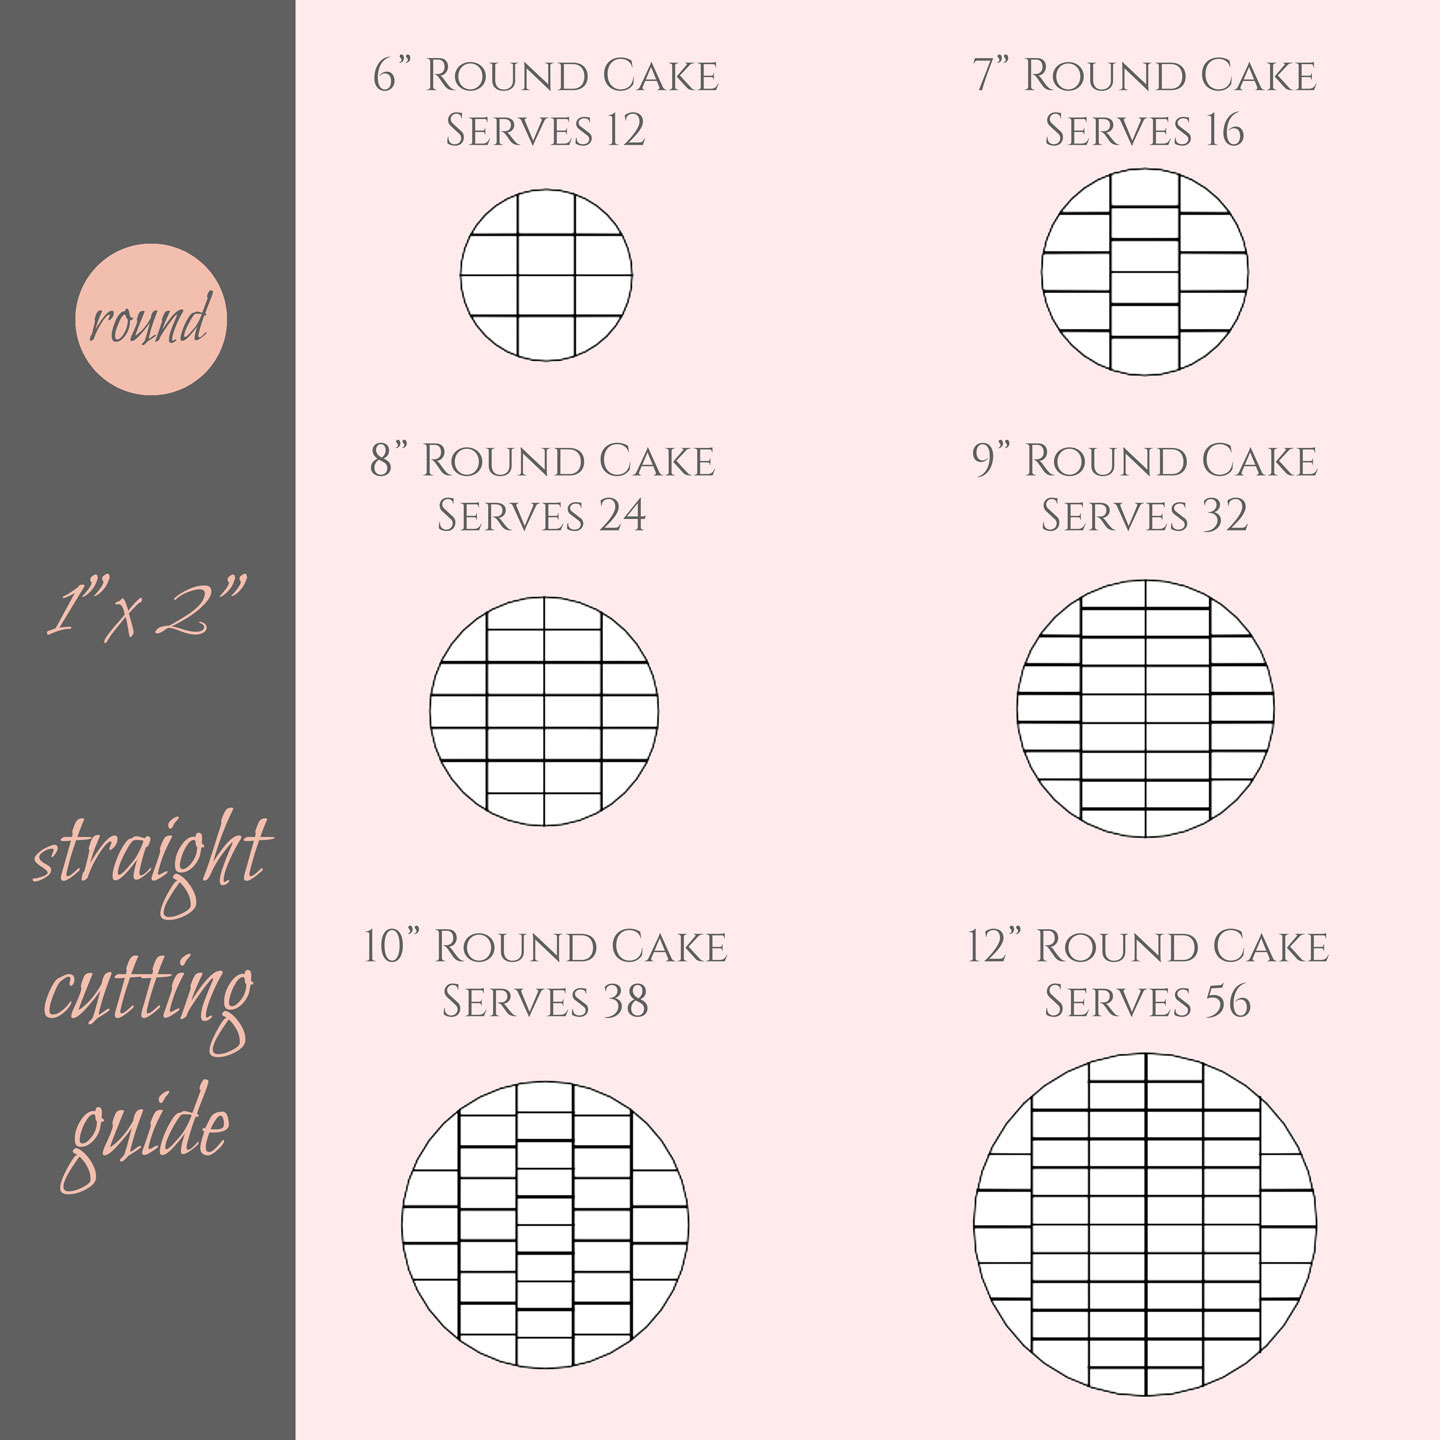 Cake cutting guide for round and square cakes